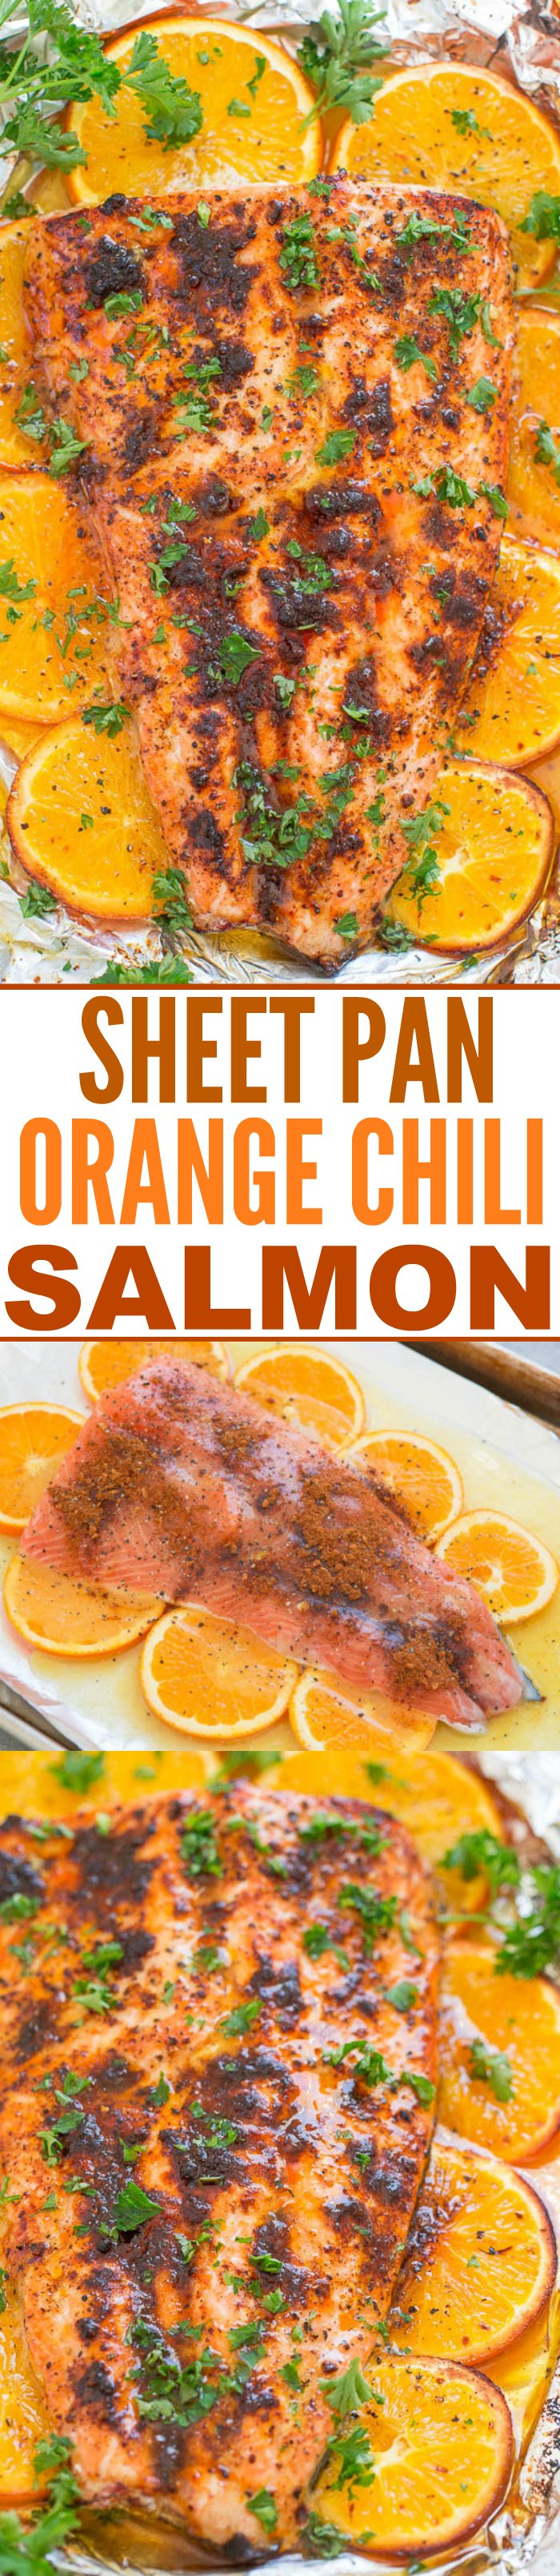 Two picture collage of sheet pan orange chili salmon with graphic title